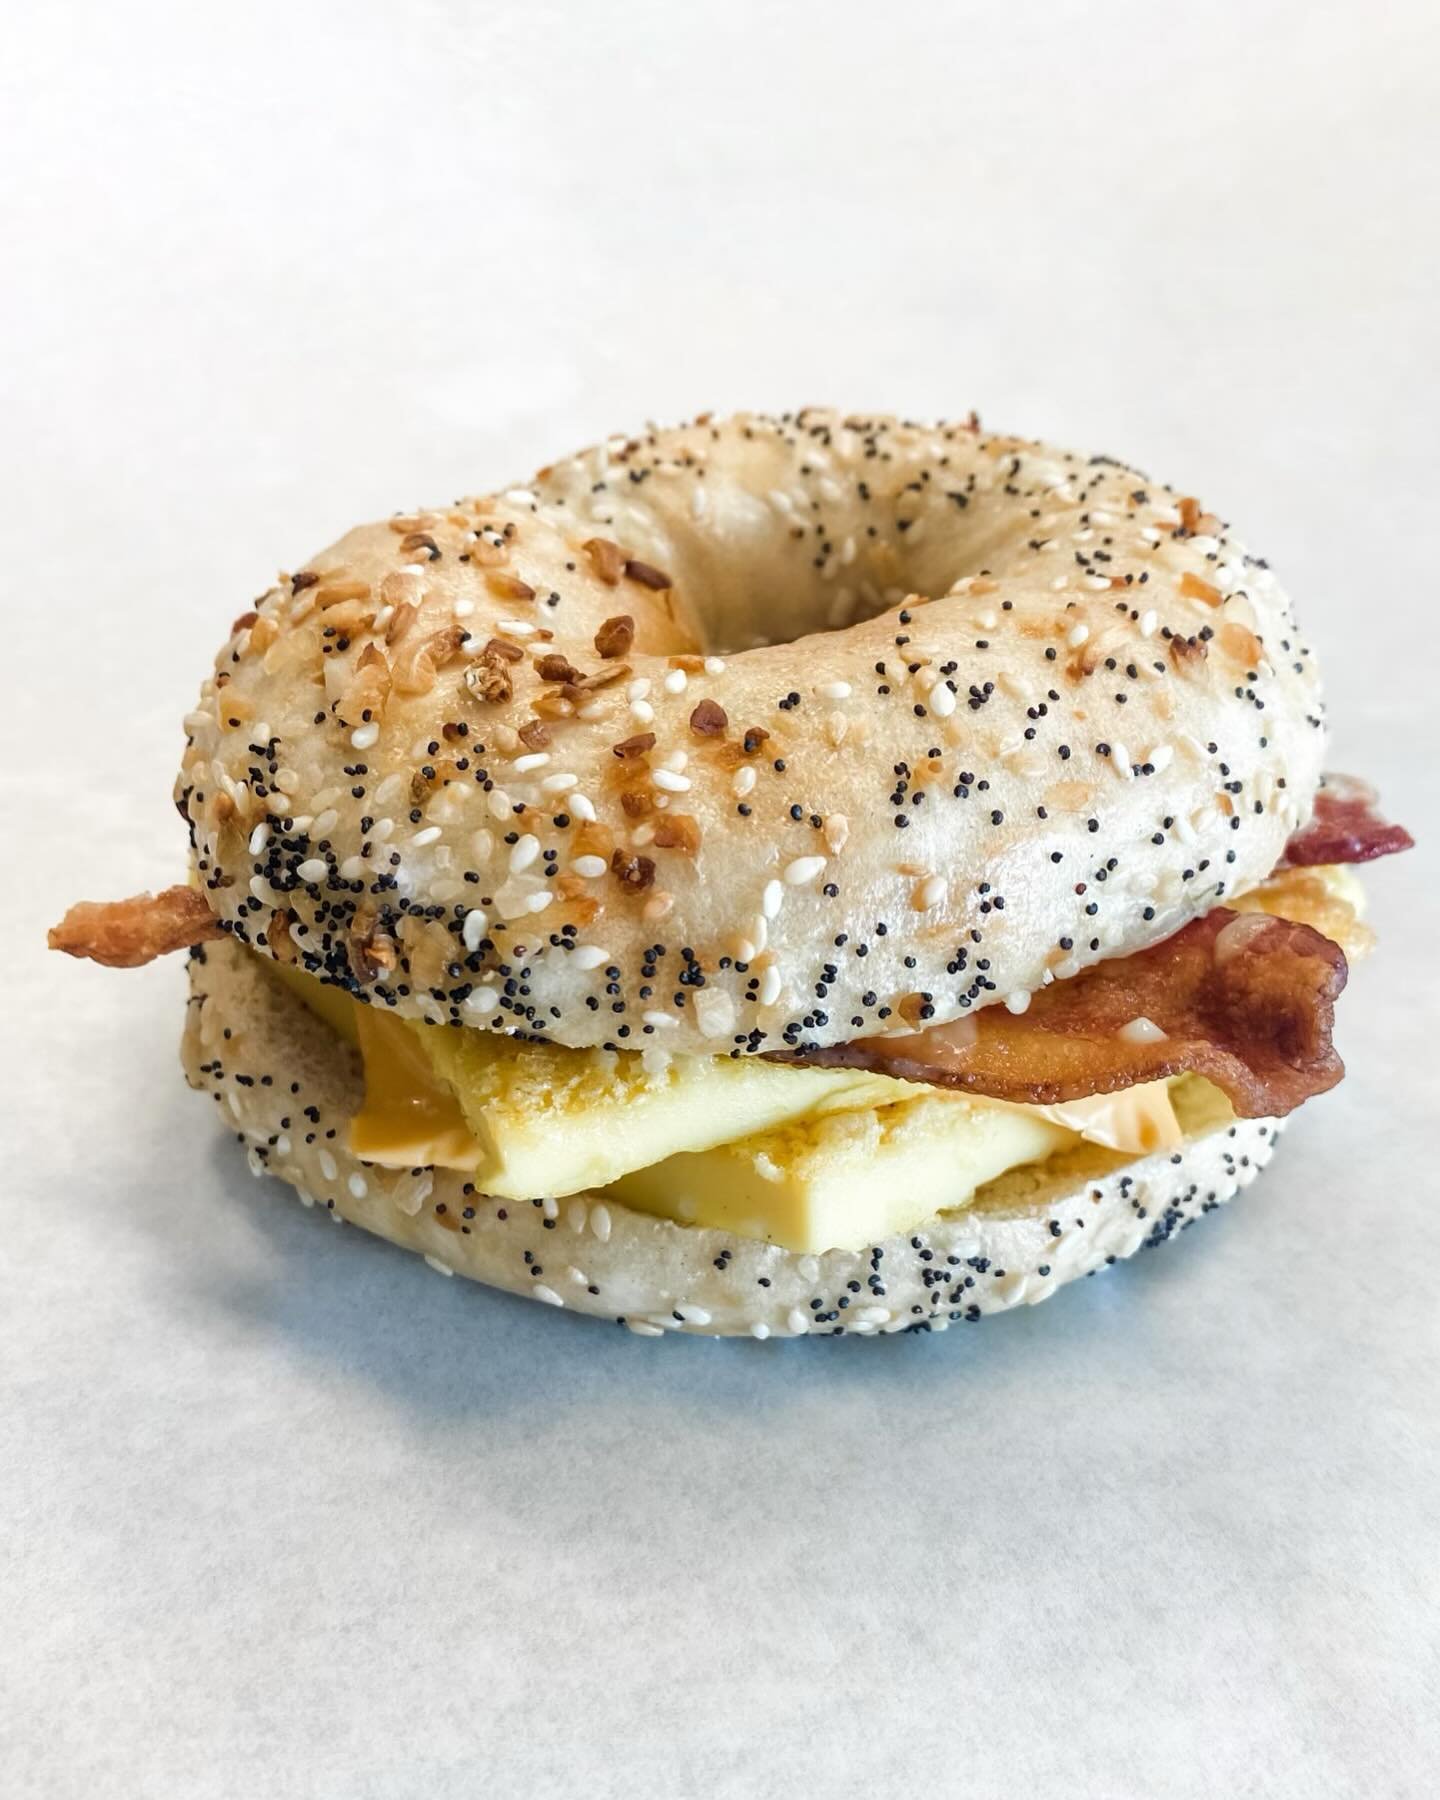 Breakfast is the most important meal of the day, next to dessert of course!😉

We&rsquo;re open today, sandwich slinging, 8a-1pm. Stop on in and say &ldquo;hi.&rdquo; See you soon!

34161 Center Ridge Road 
North Ridgeville